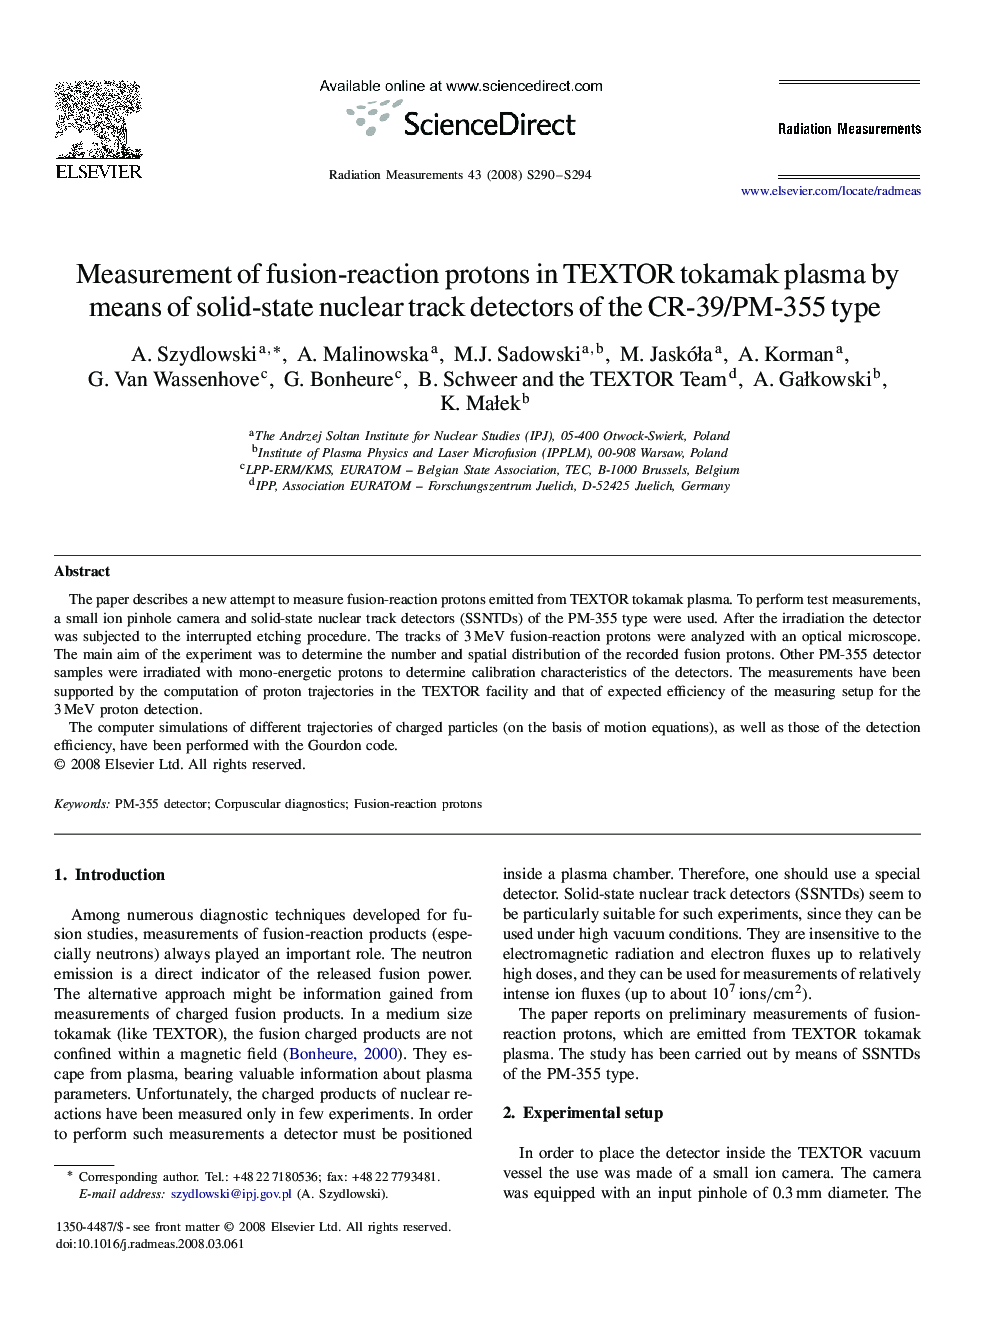 Measurement of fusion-reaction protons in TEXTOR tokamak plasma by means of solid-state nuclear track detectors of the CR-39/PM-355 type